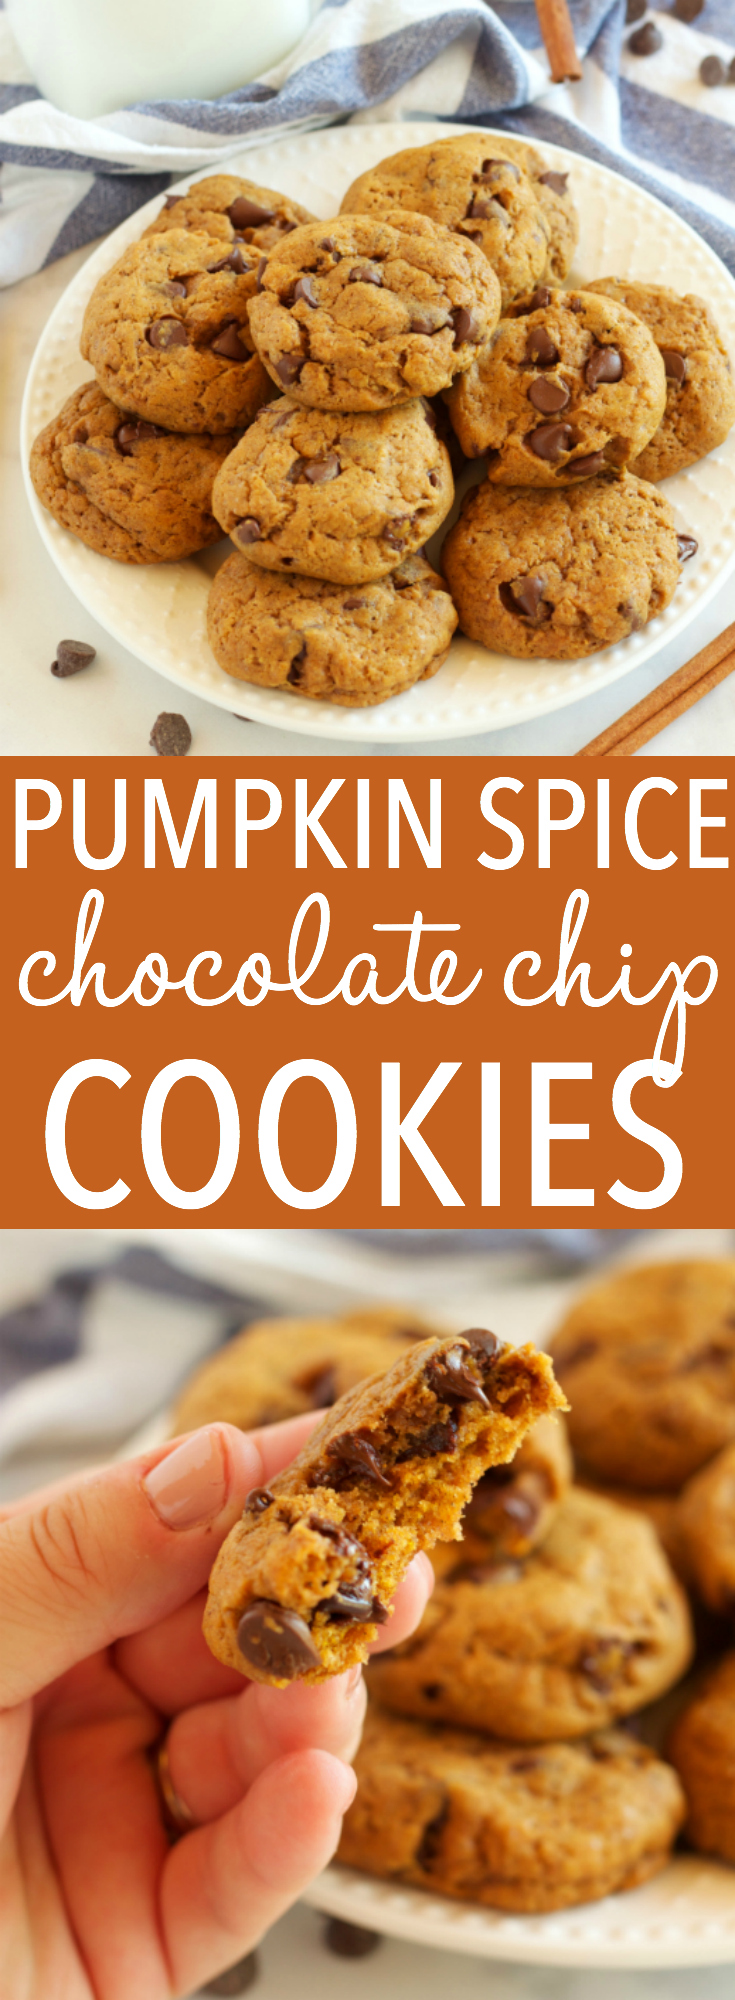 These Pumpkin Spice Chocolate Chip Cookies are perfectly soft and chewy, full of pumpkin and spice and delicious chocolate! Recipe from thebusybaker.ca! via @busybakerblog